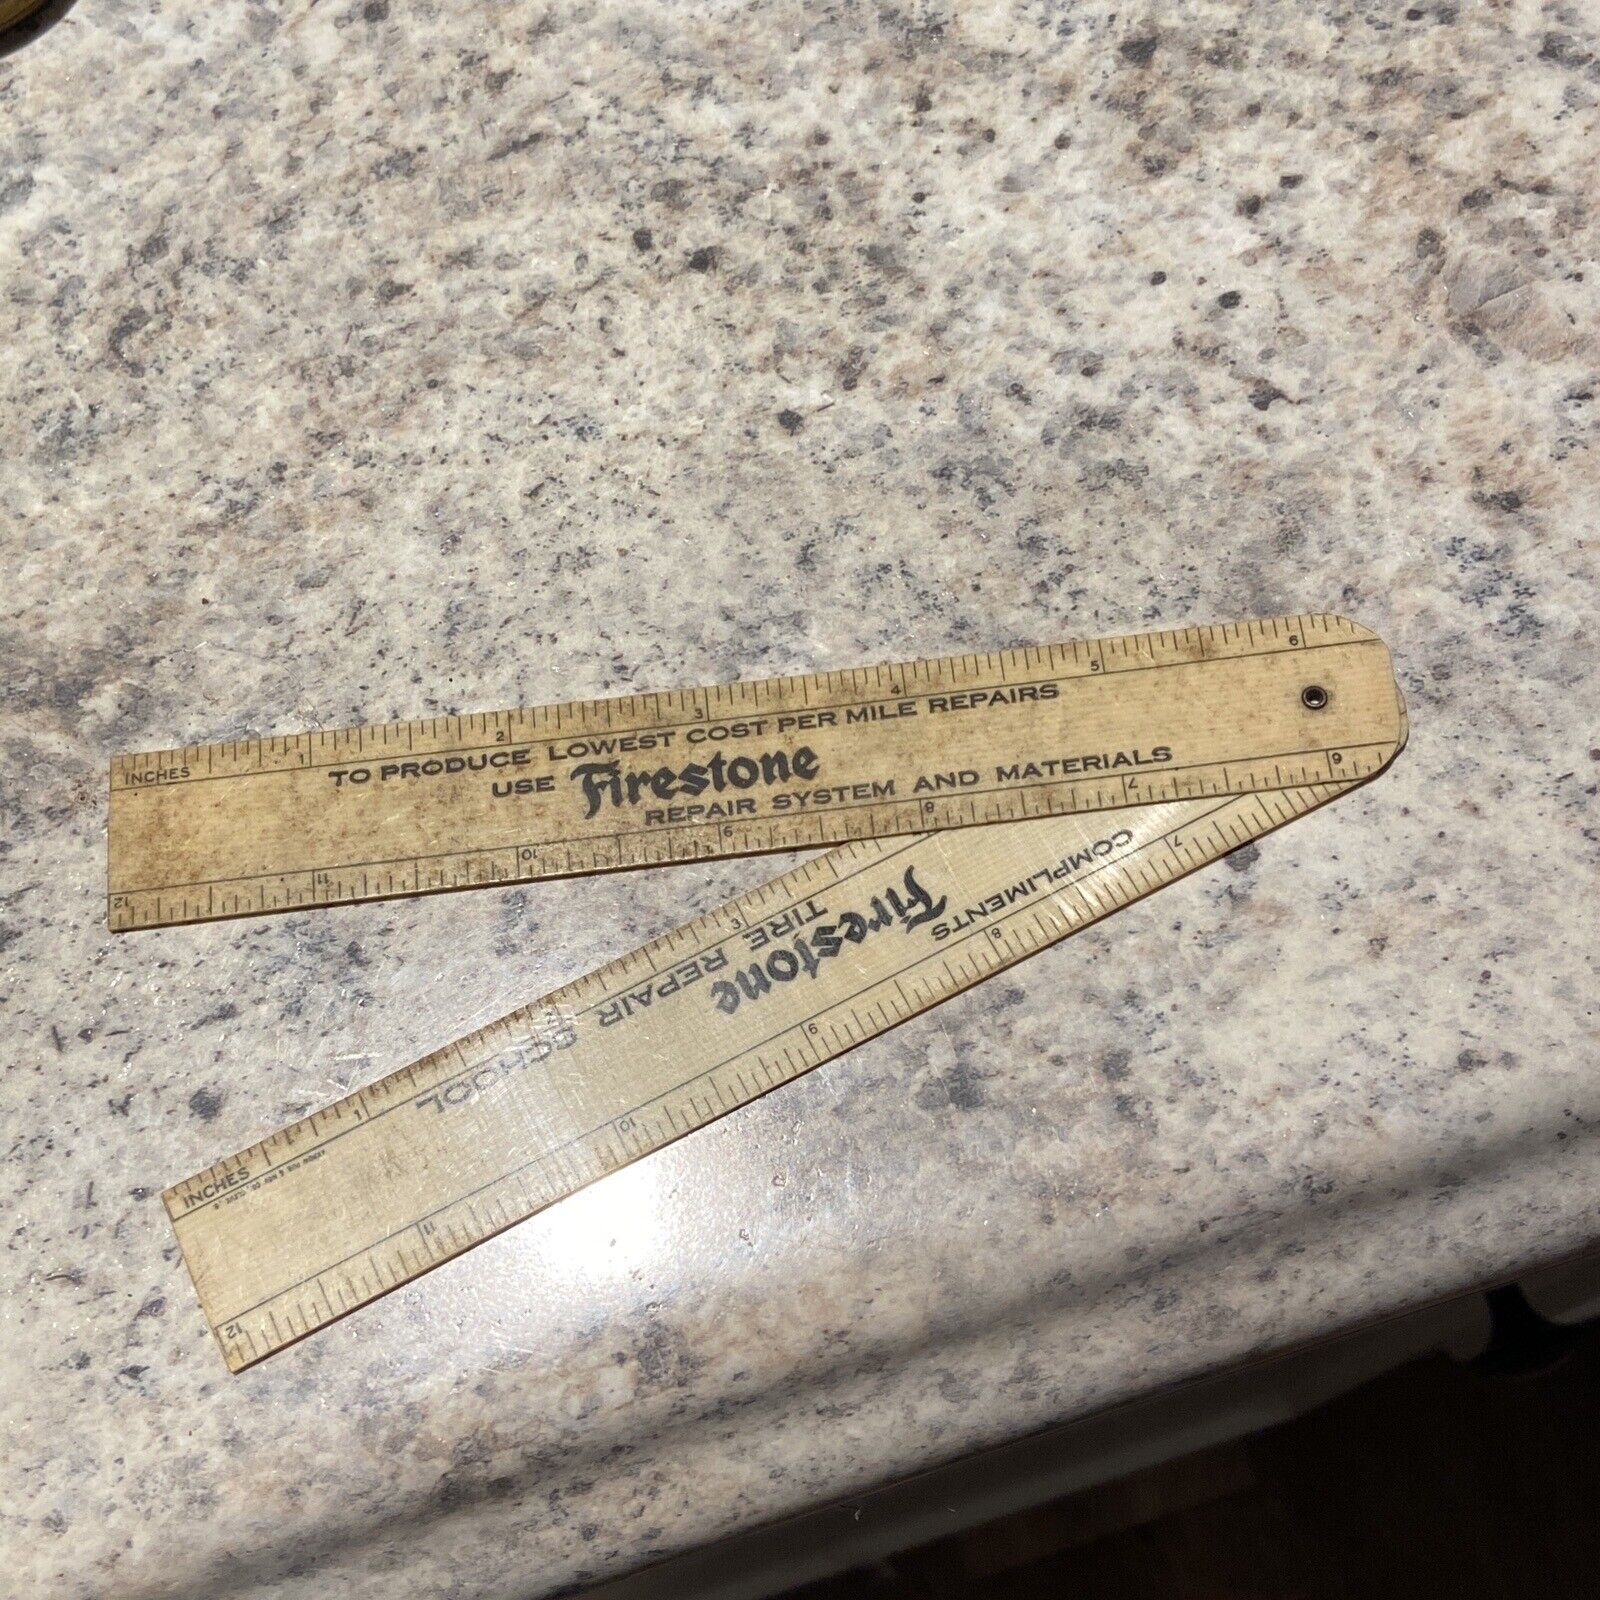 Vintage Firestone Celluloid Ruler 1950s-1960s Tire Repair Hinged